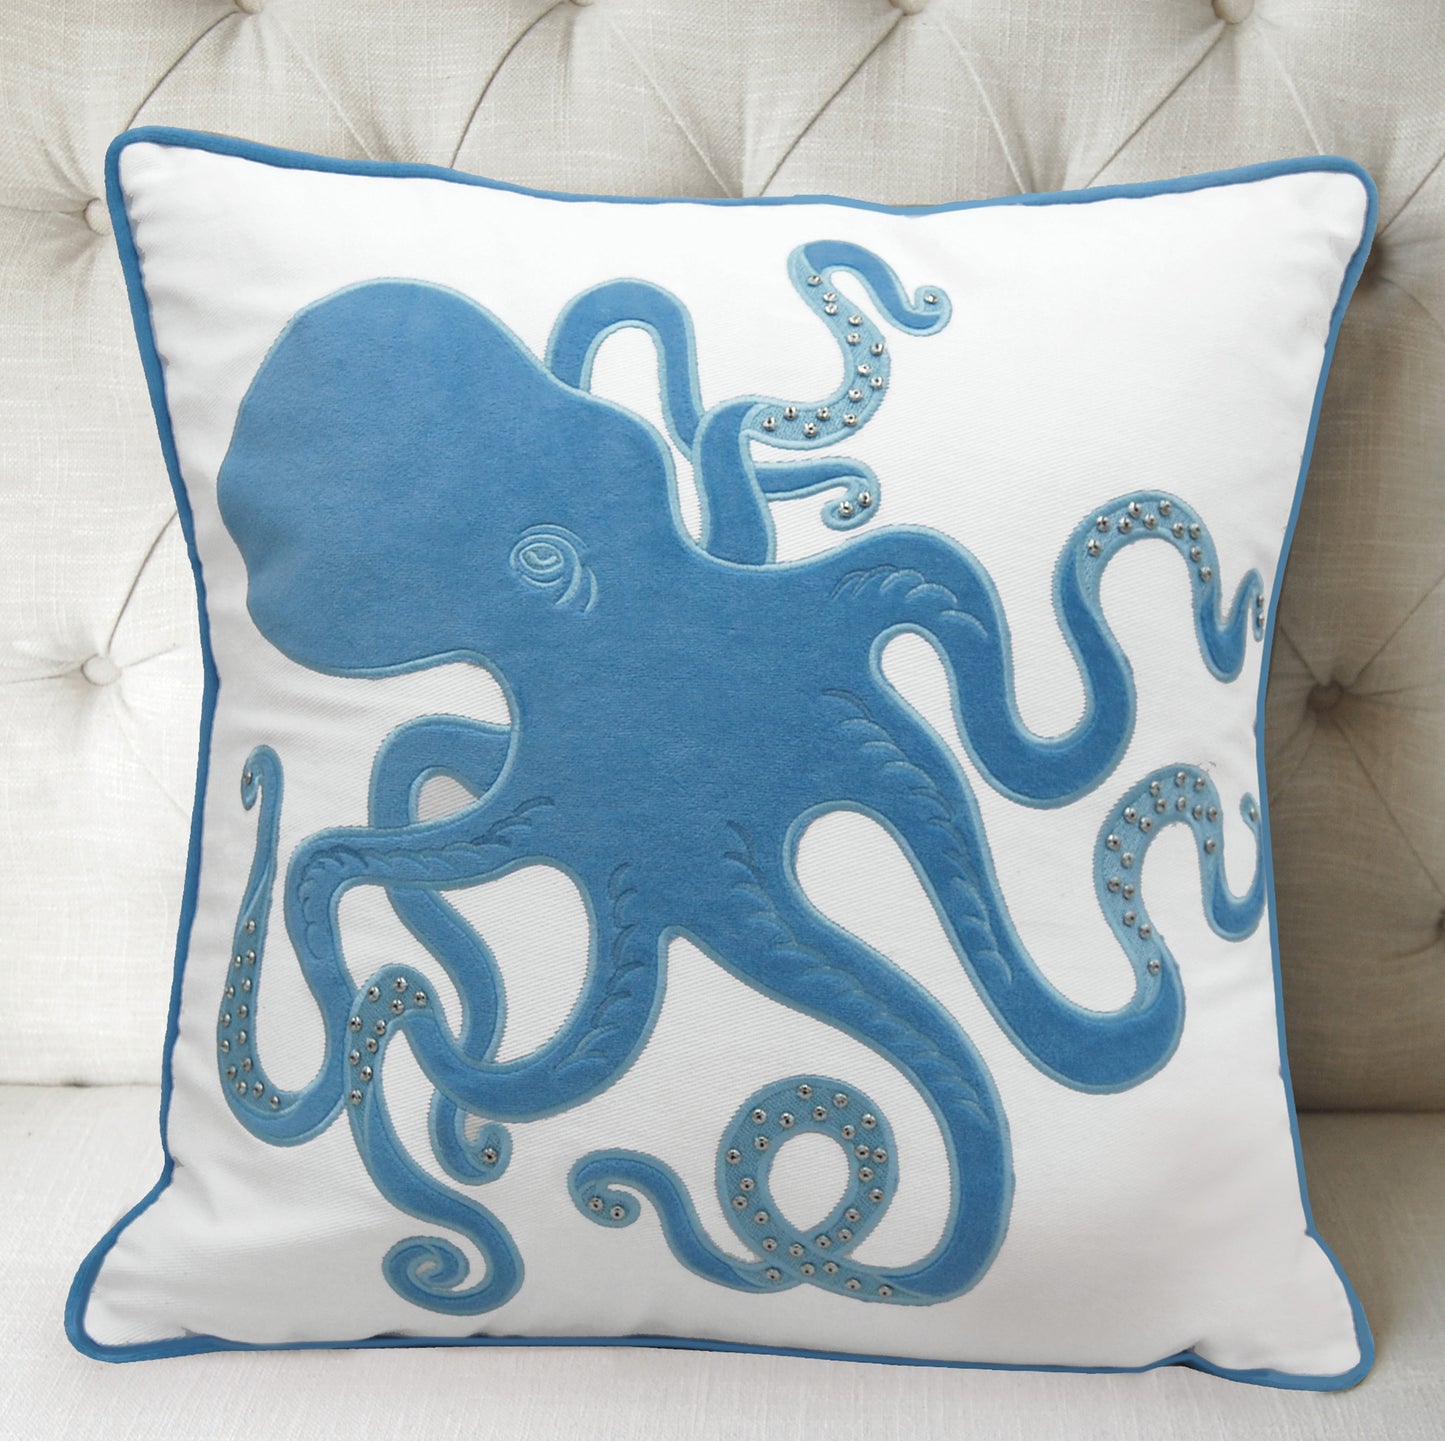 Blue Inkling Octopus indoor pillow styled on a tufted gray couch.